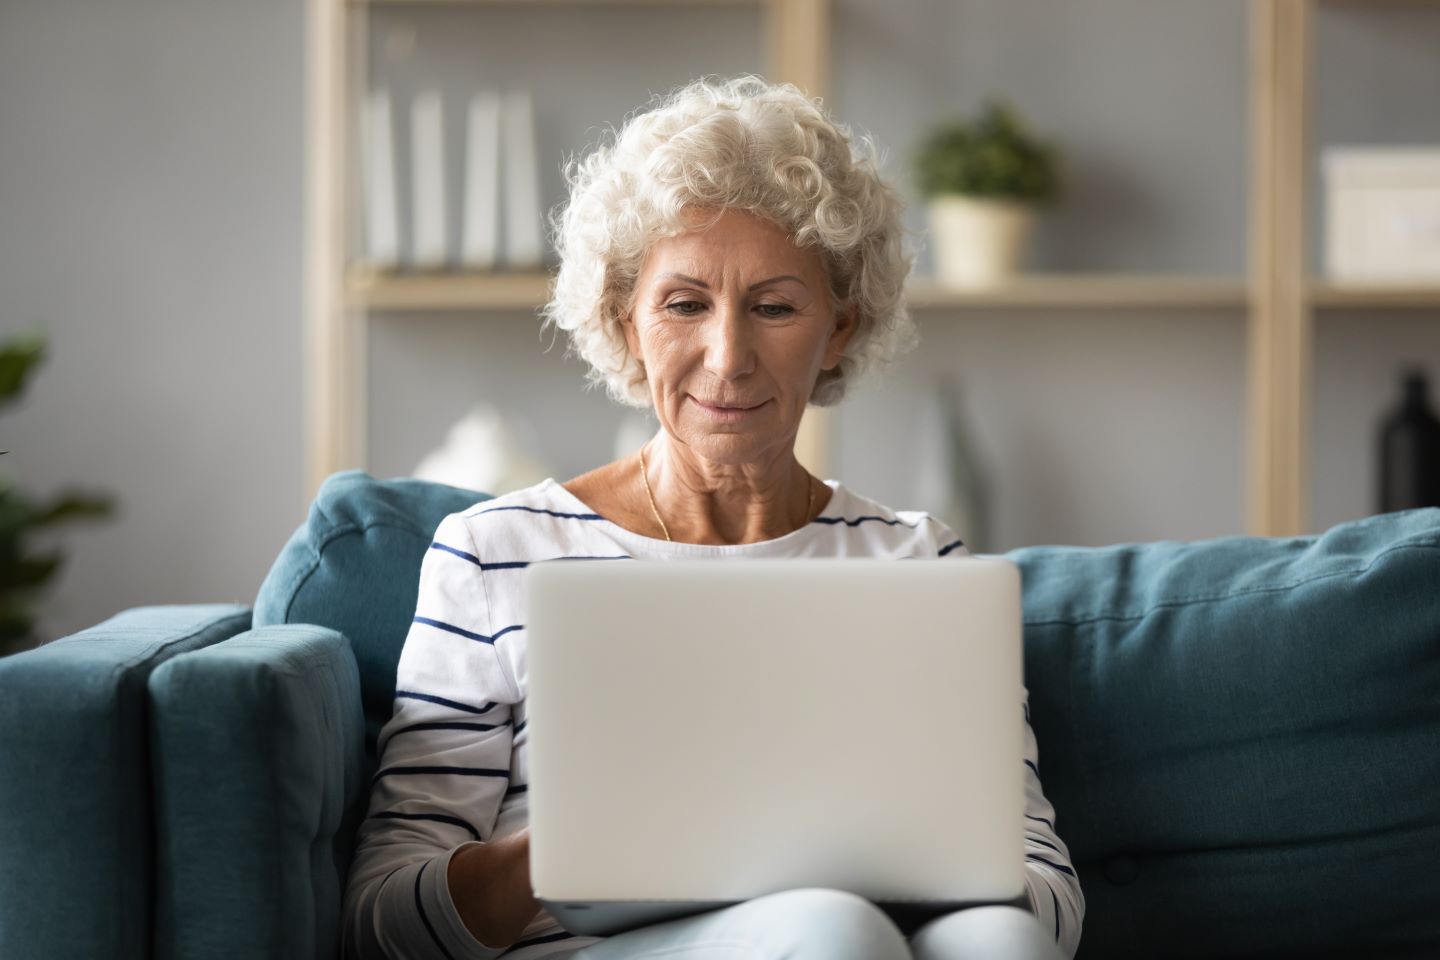 An elderly woman with curly gray hair is sitting on a teal sofa, using a laptop. She appears focused and content as she looks at the screenAn elderly woman with curly gray hair is sitting on a teal sofa, using a laptop. She appears focused and content as she looks at the screen